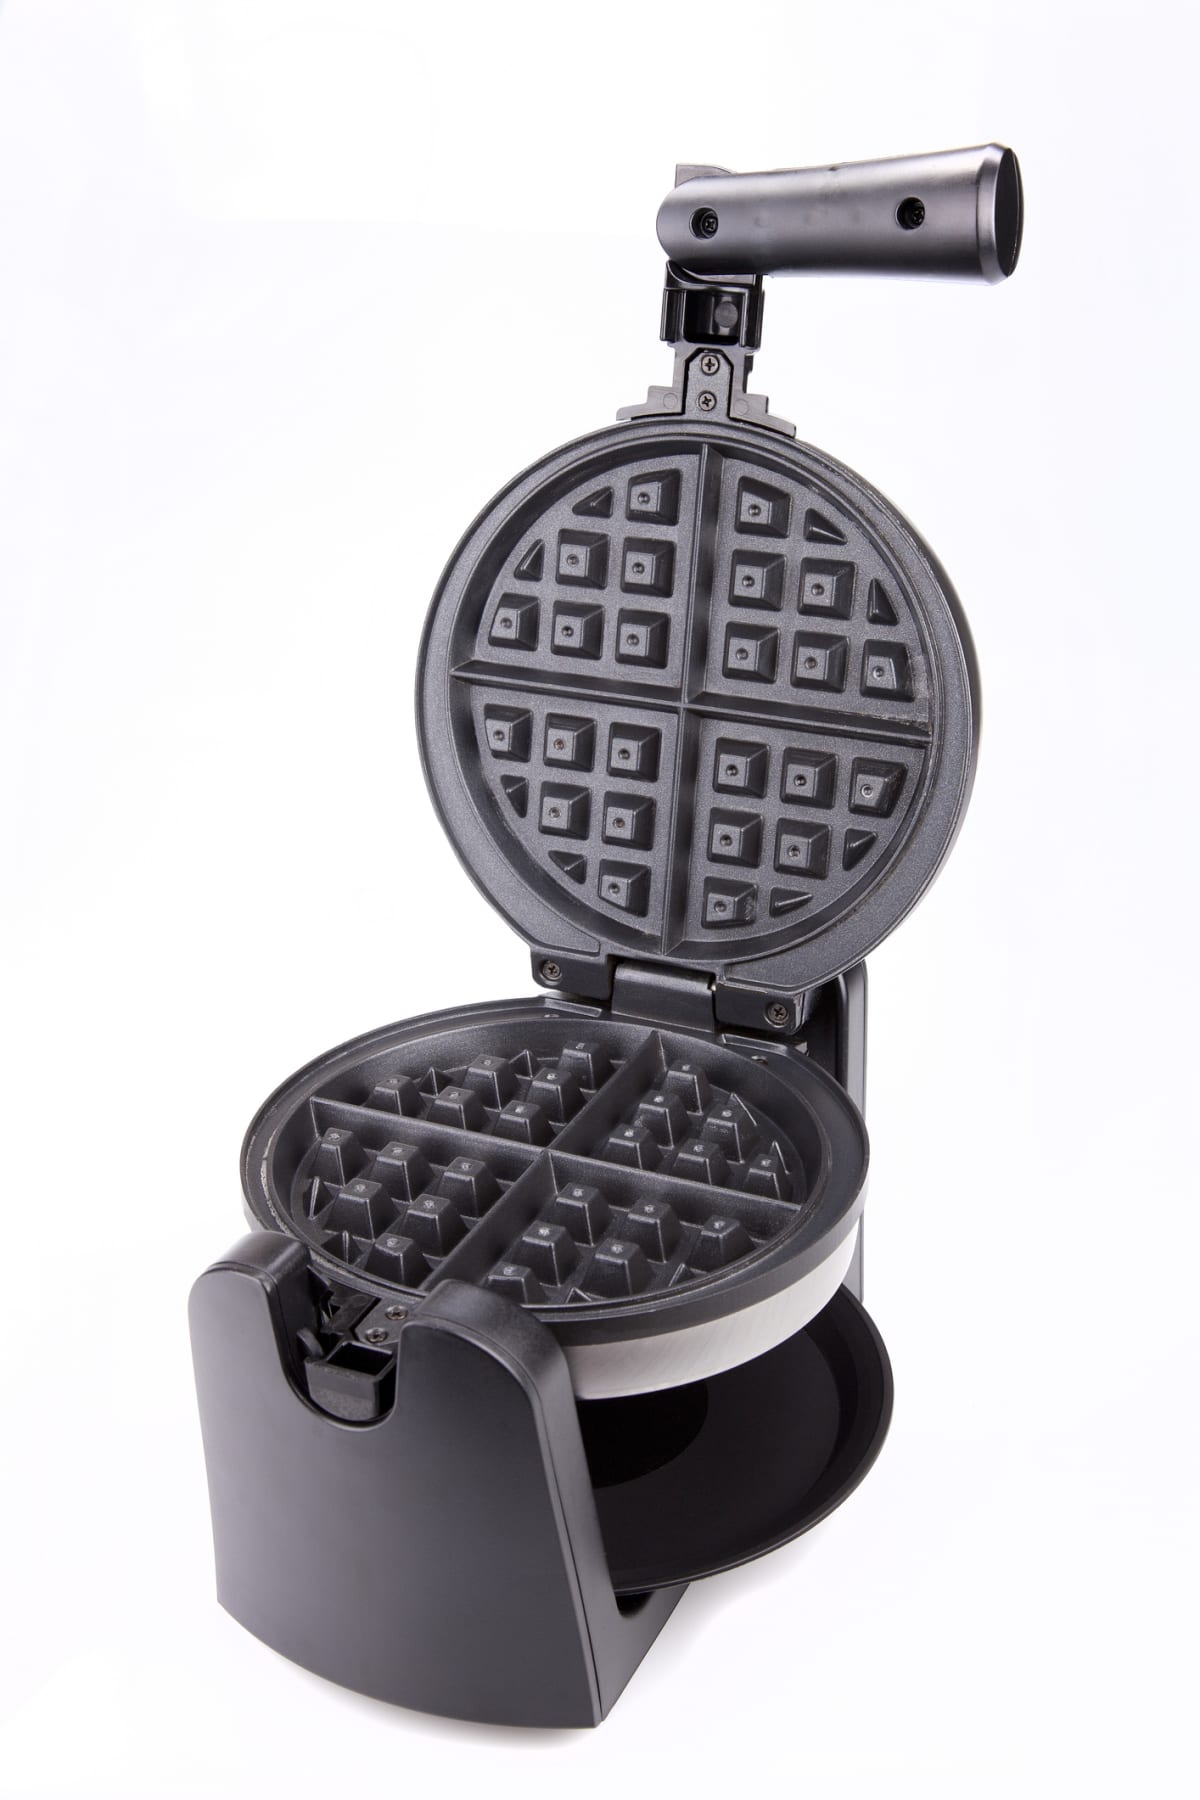 Stainless steel waffle maker on a white surface. Waffle maker isolated on white background.